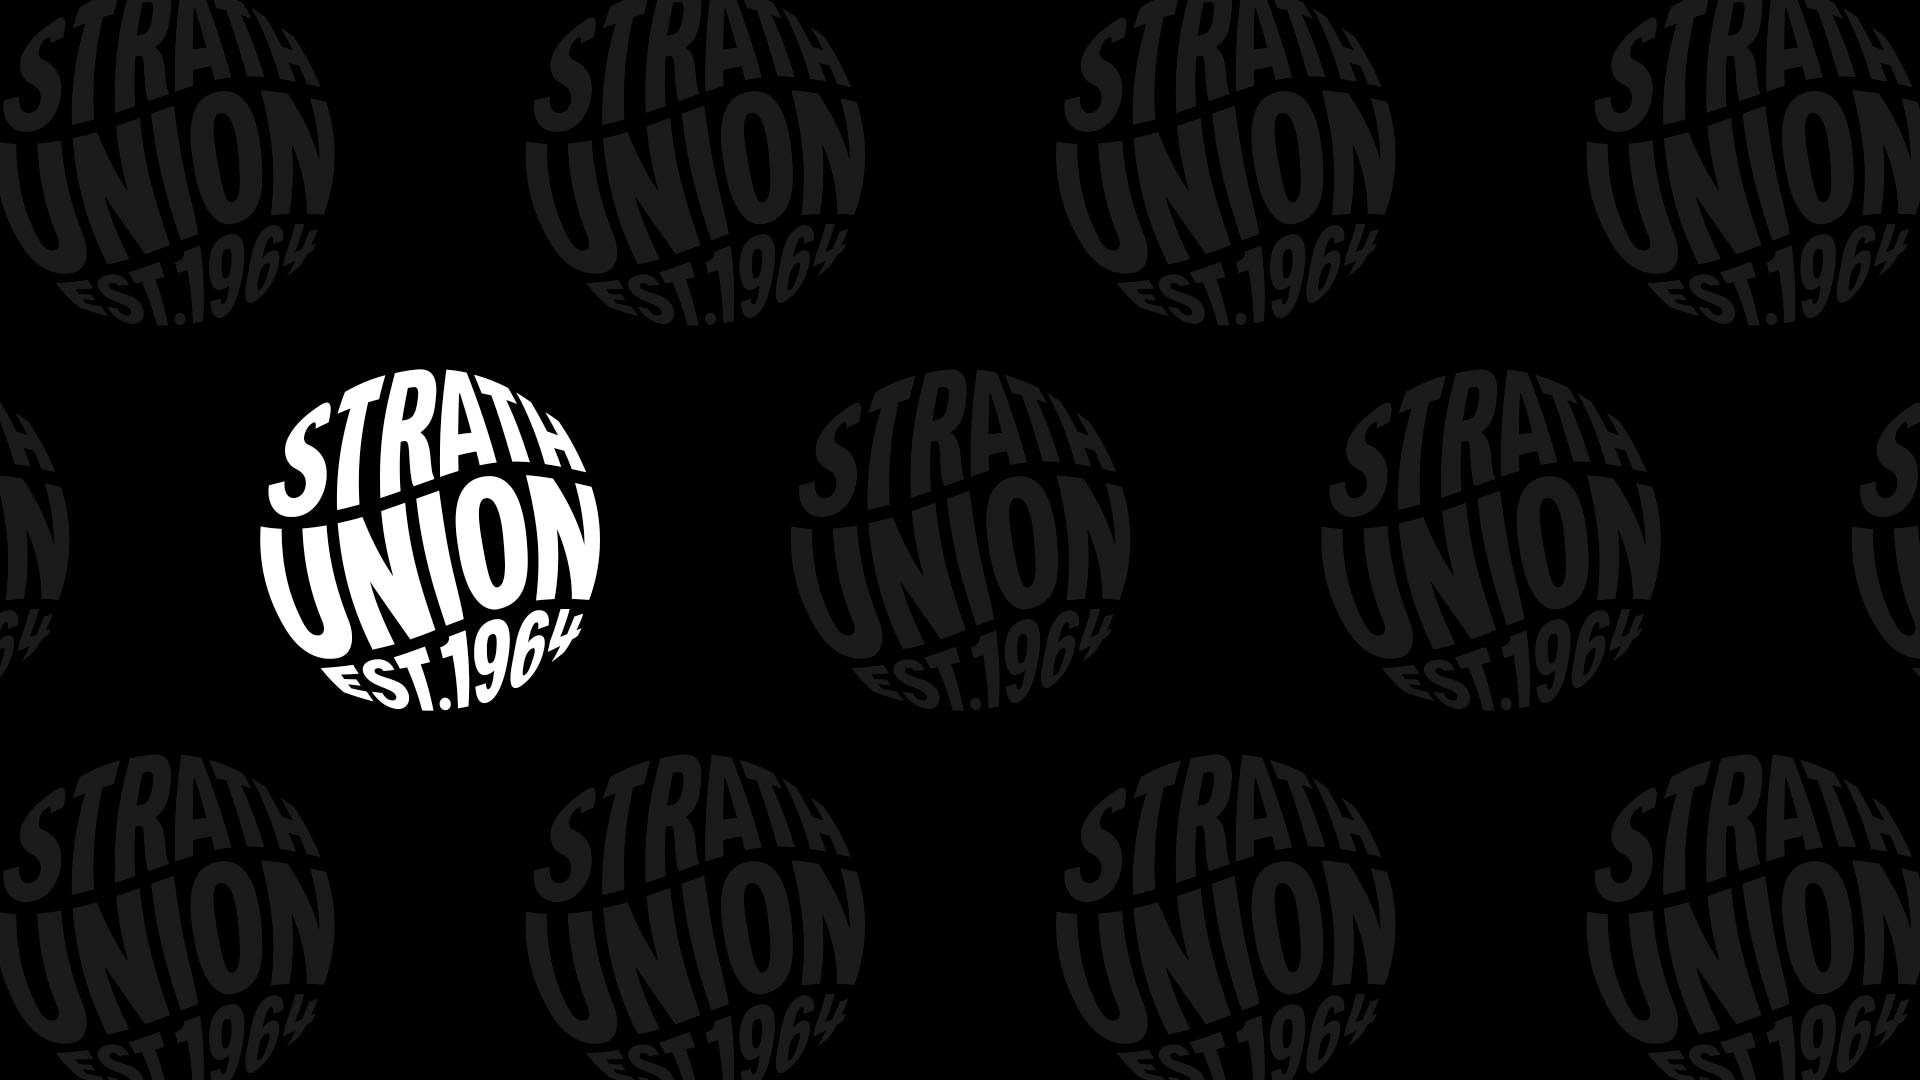 The Strath Union logo repeated over a black background